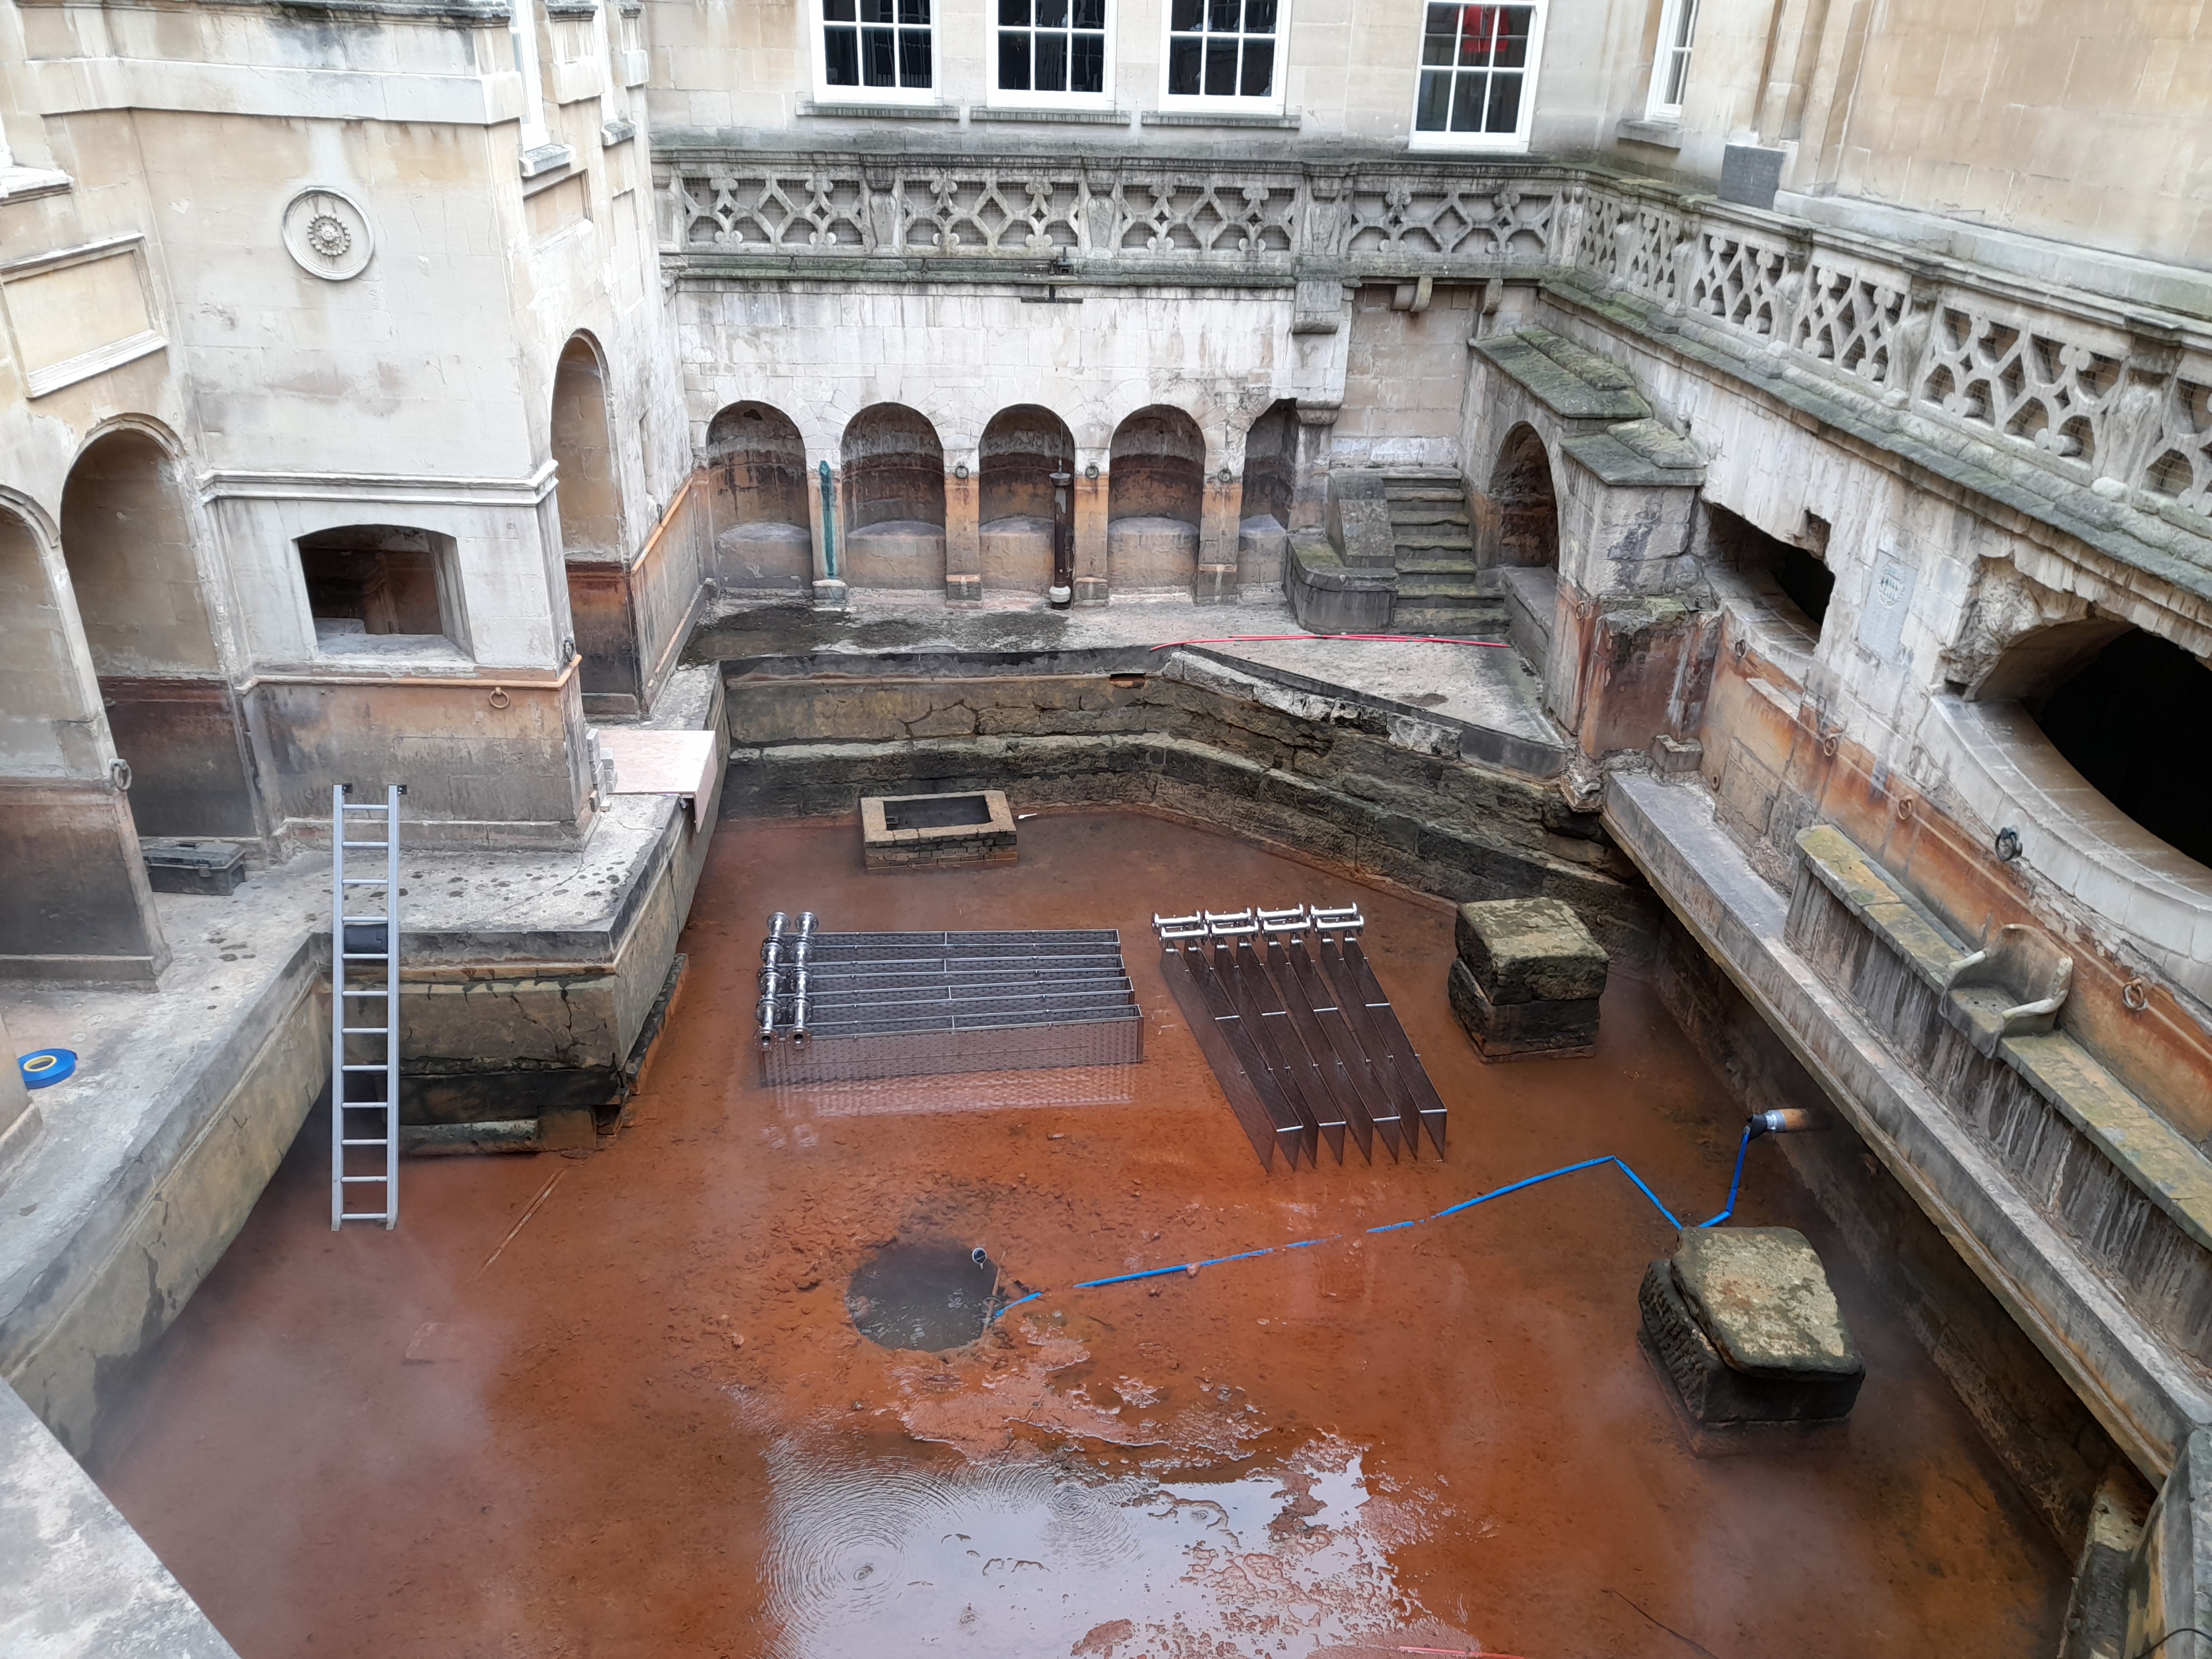 The King's Bath has been drained ready for installation of the energy capture scheme